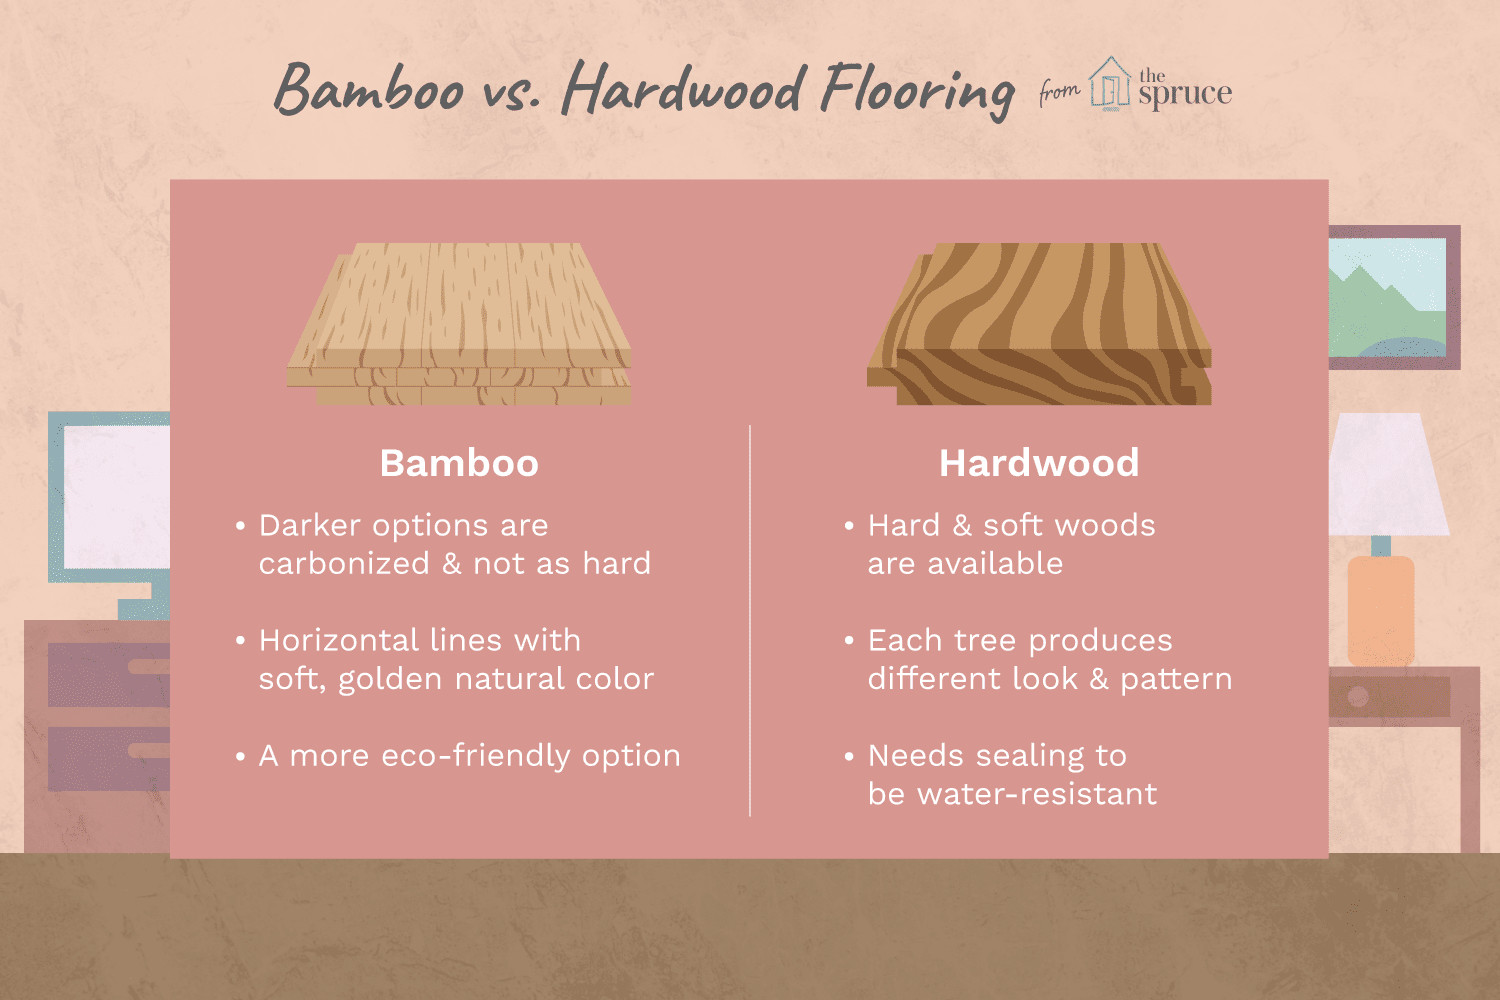 19 Fashionable ash Hardwood Flooring Pros and Cons 2023 free download ash hardwood flooring pros and cons of a side by side comparison bamboo and wood flooring regarding bamboo or hardwood flooring